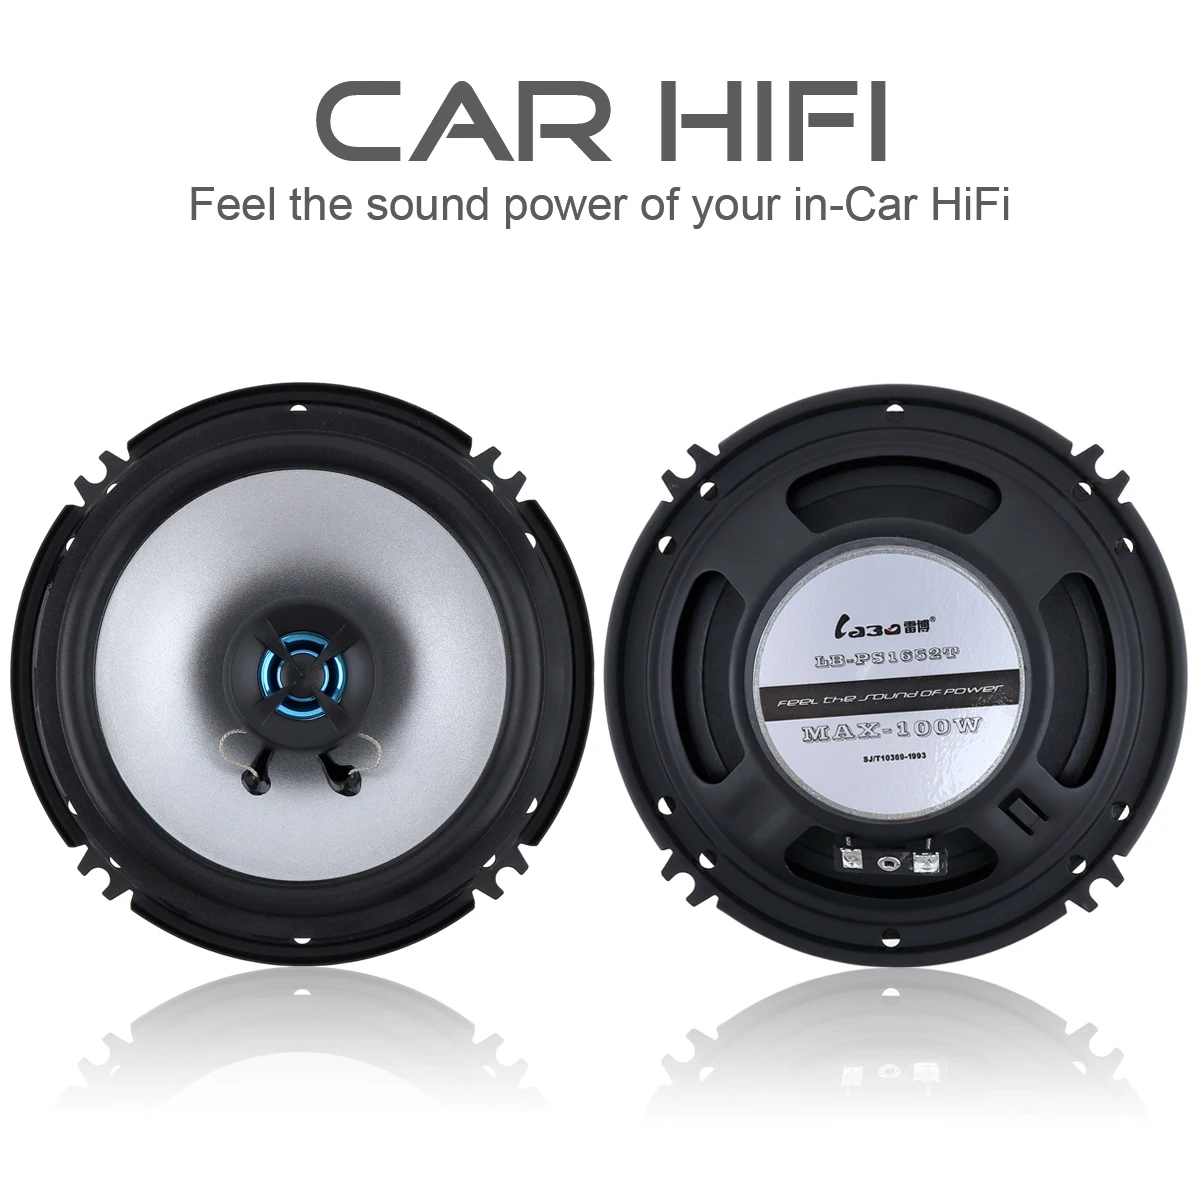 2pcs LB-PS1652T 100W 2 Way Car Coaxial Vehicle Door Auto Audio Music Stereo Full Range Frequency Hifi Speakers ts a5773r car hifi coaxial speaker vehicle door auto audio music stereo full range frequency speakers for cars